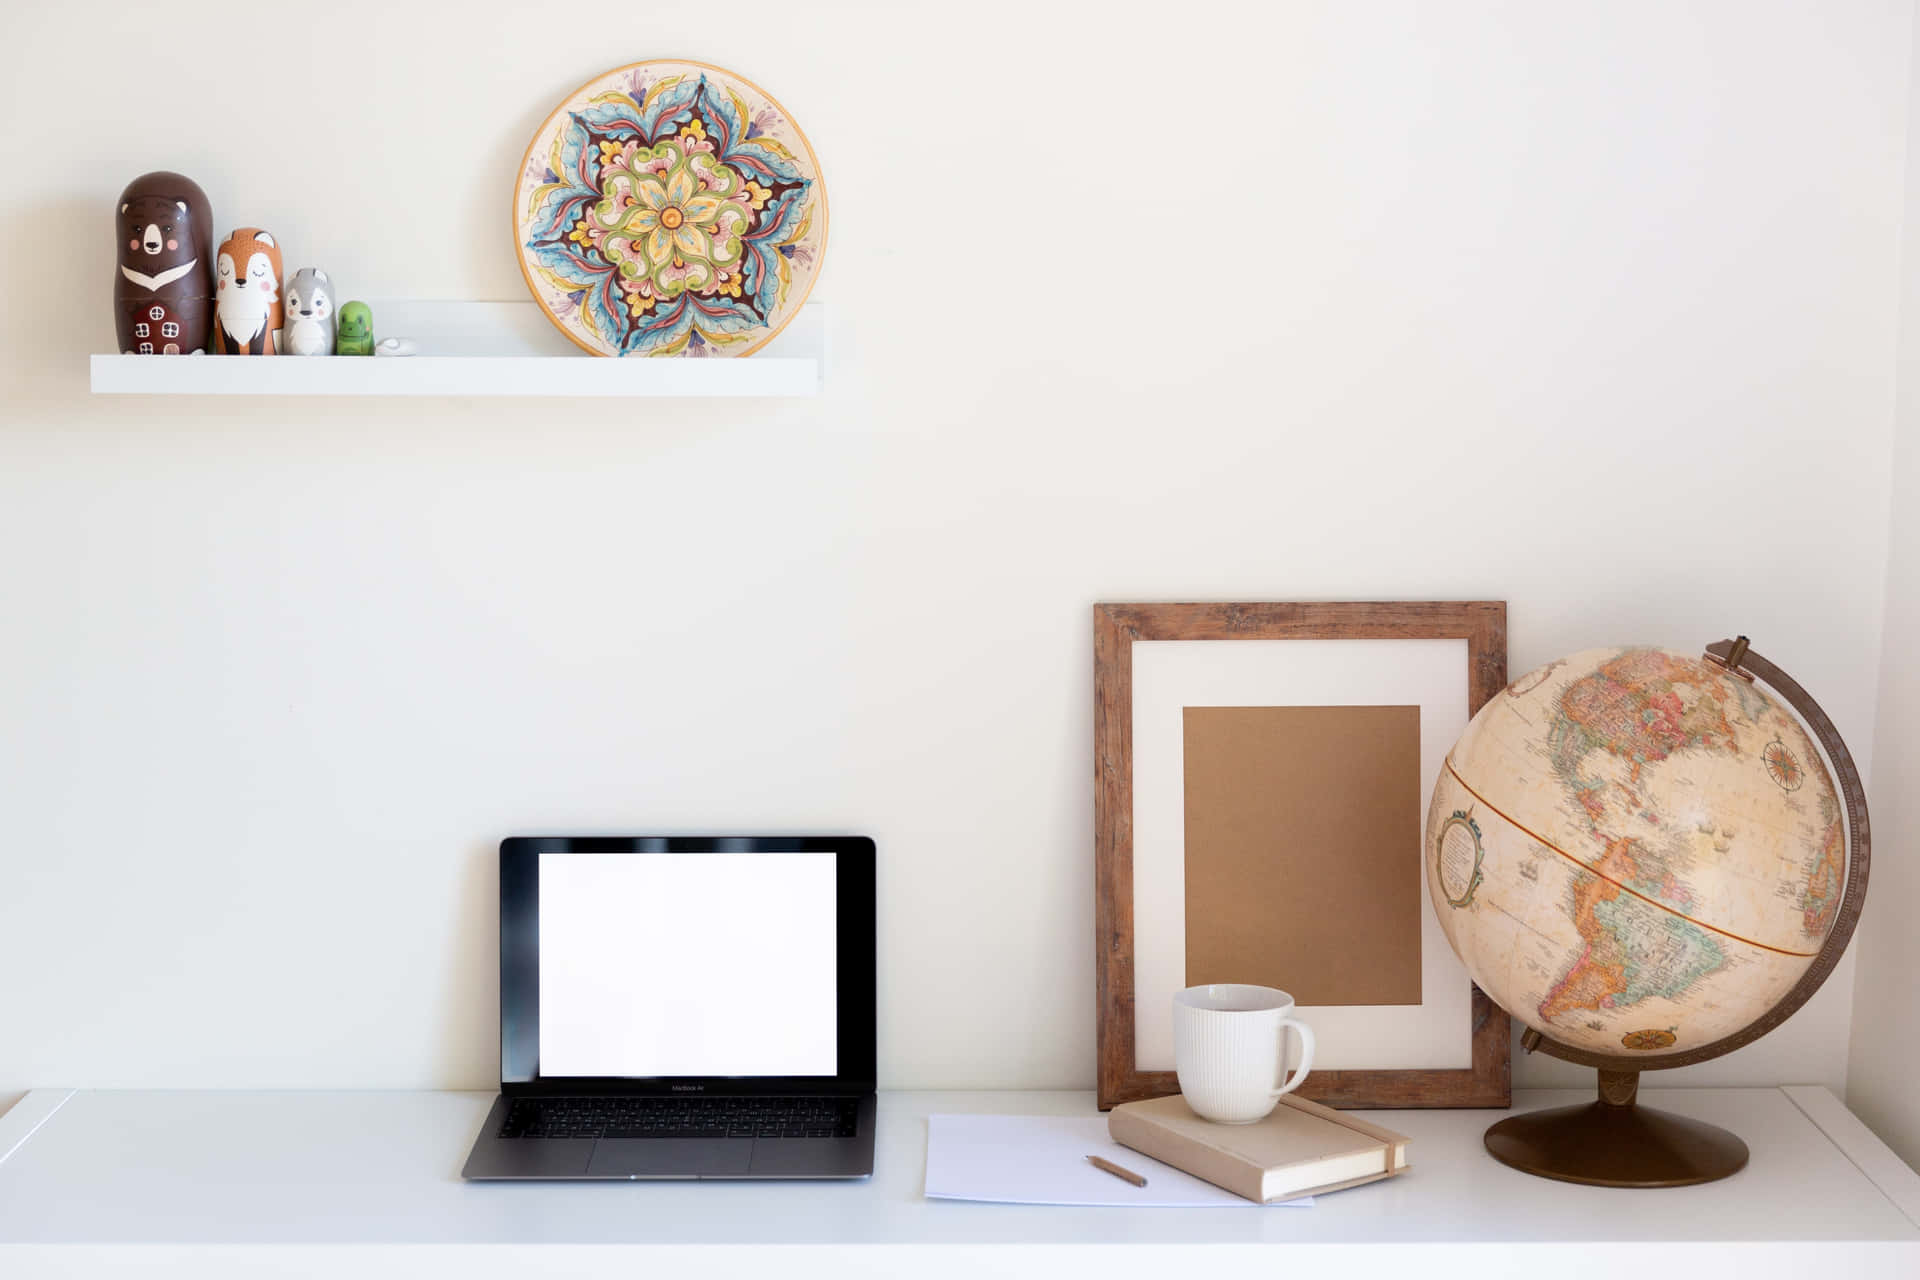 A White Desk With A Laptop, Globe, And A Vase